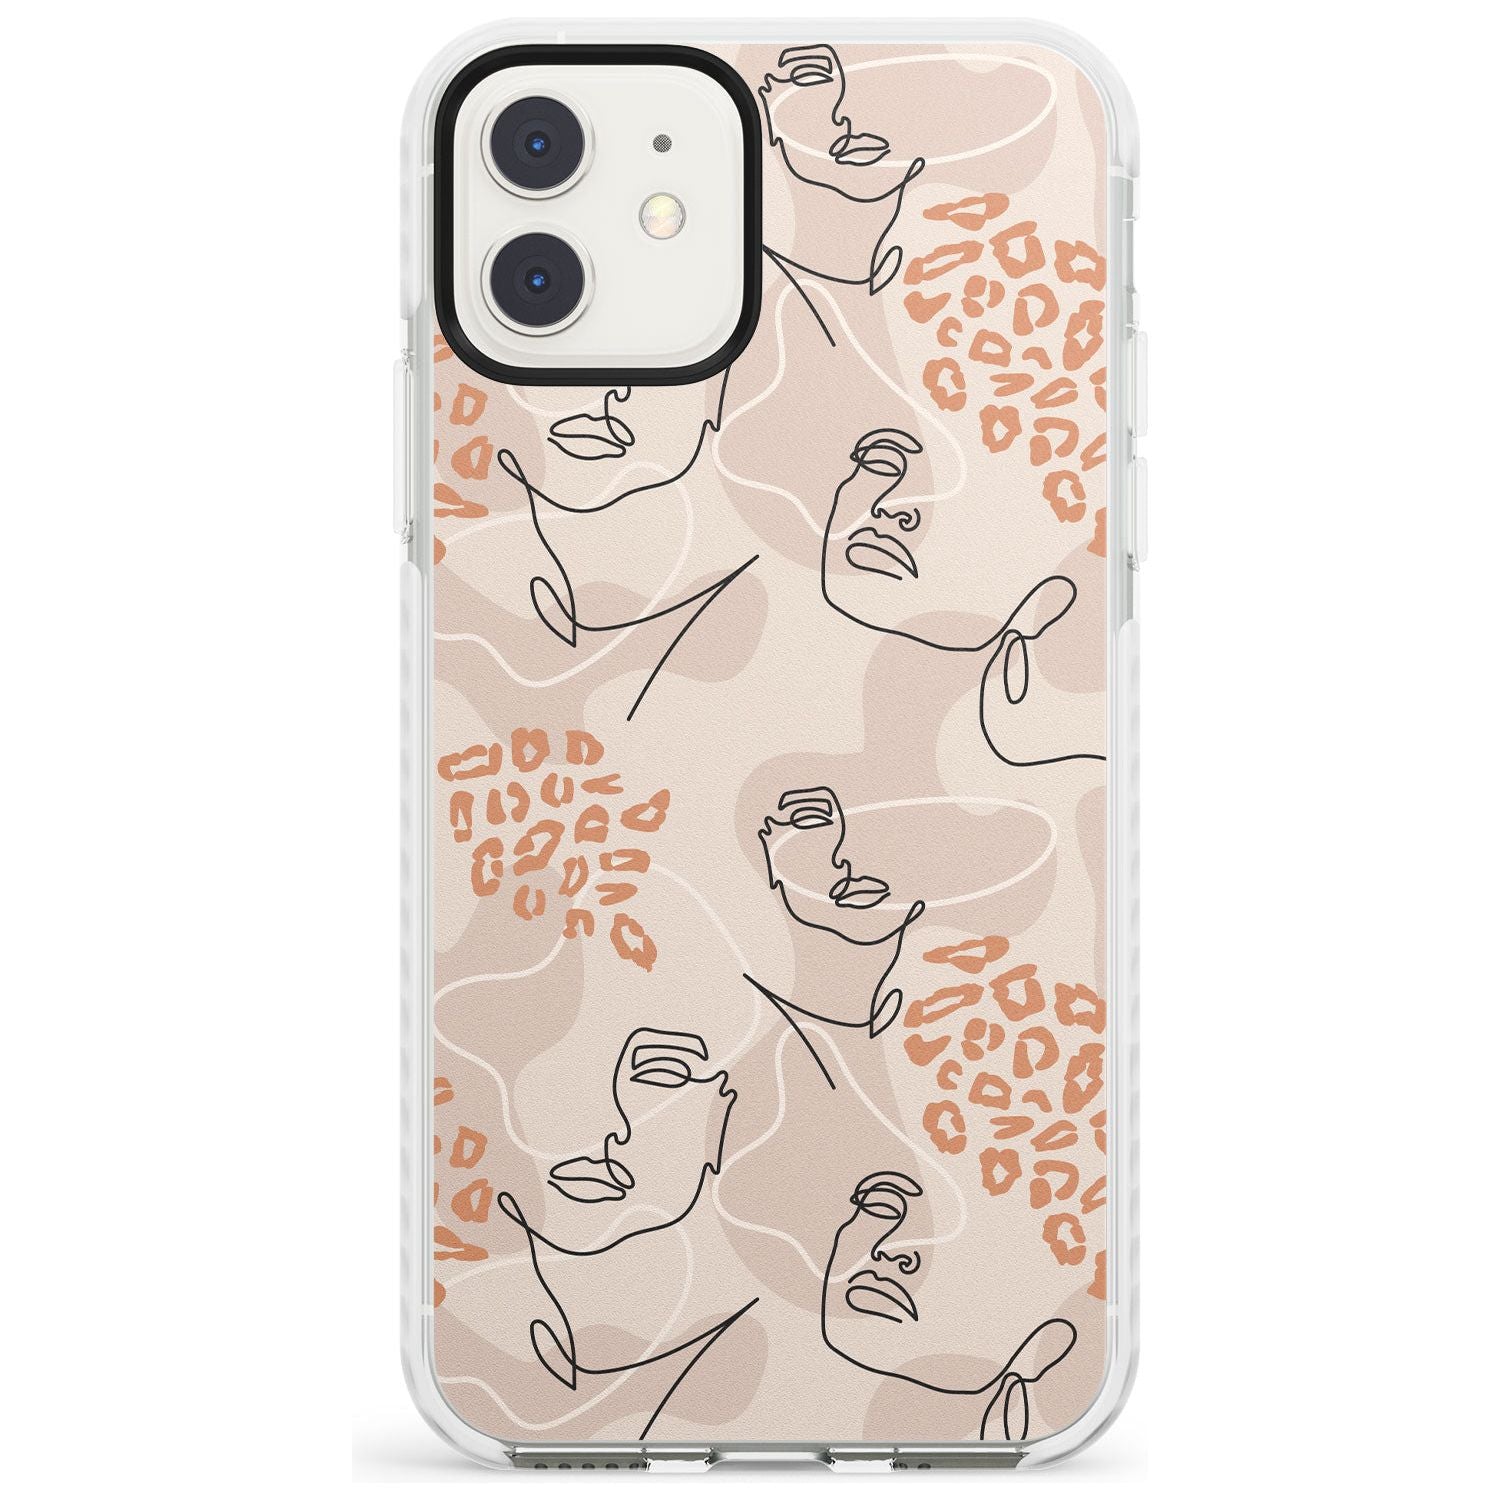 Leopard Print Stylish Abstract Faces Impact Phone Case for iPhone 11